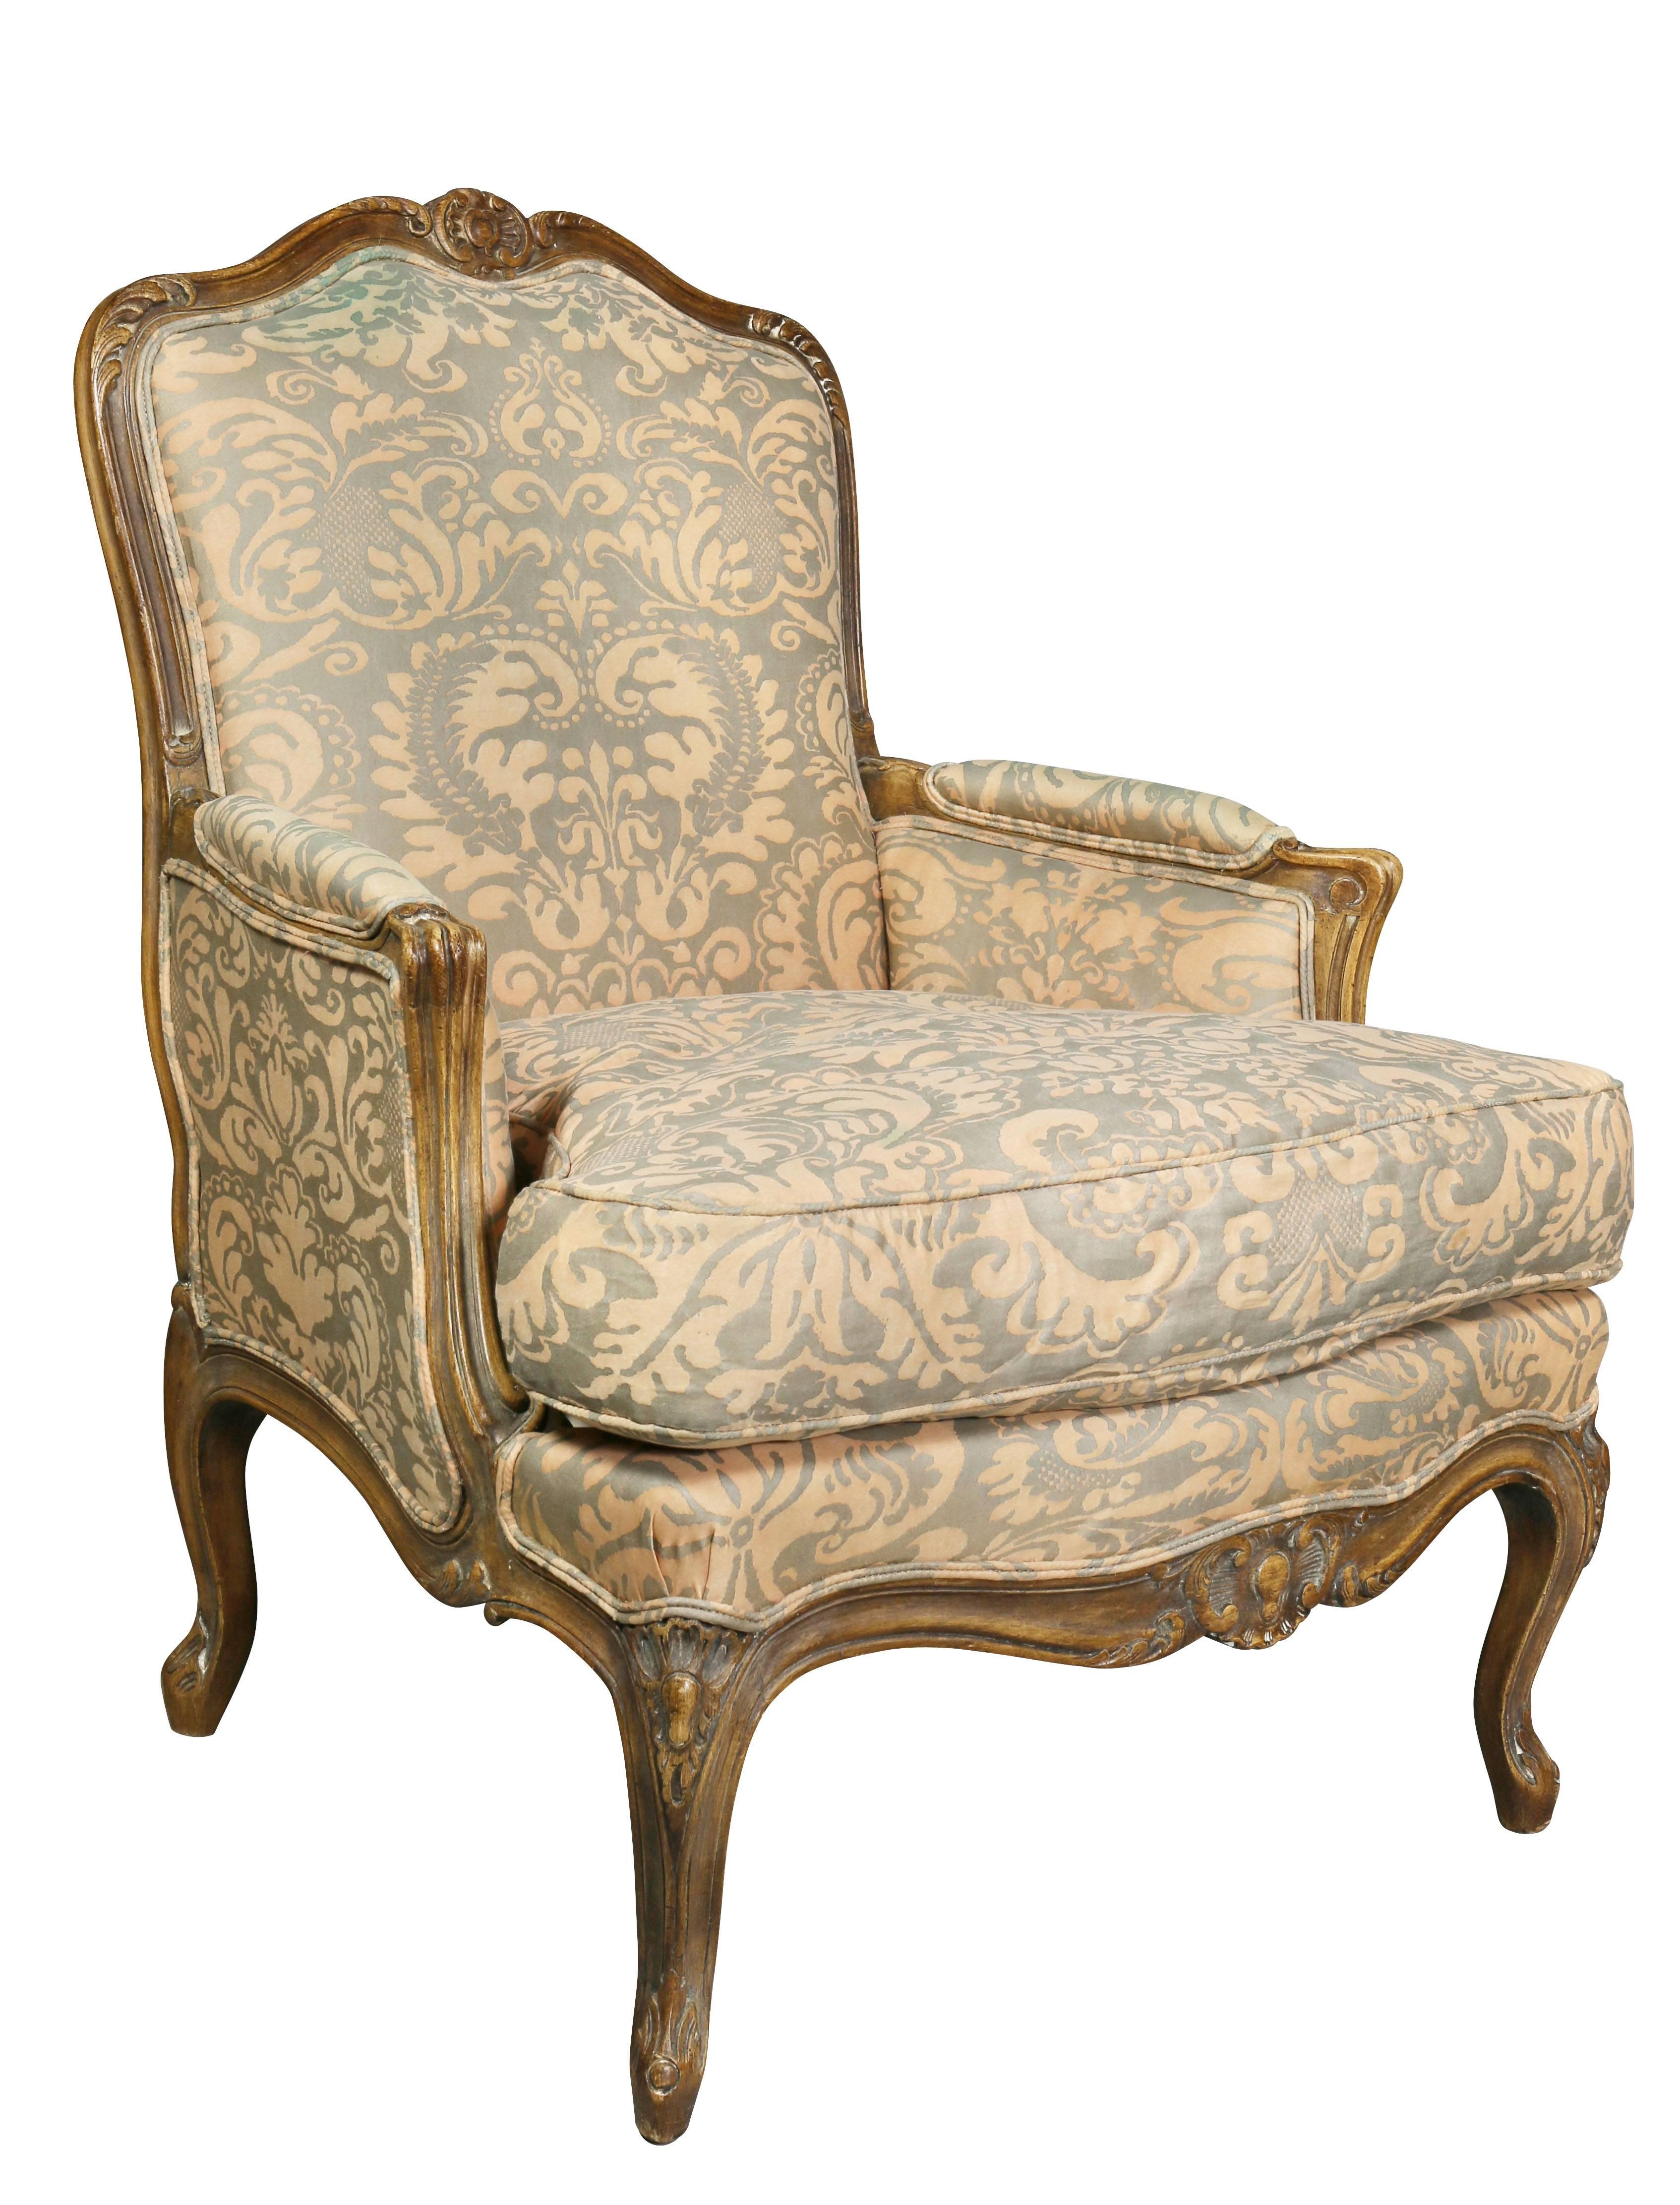 Each with a serpentine back within a carved frame and seat raised on cabriole legs, and upholstered in Fortuny fabric. Top of back of one chair with water bleed mark.